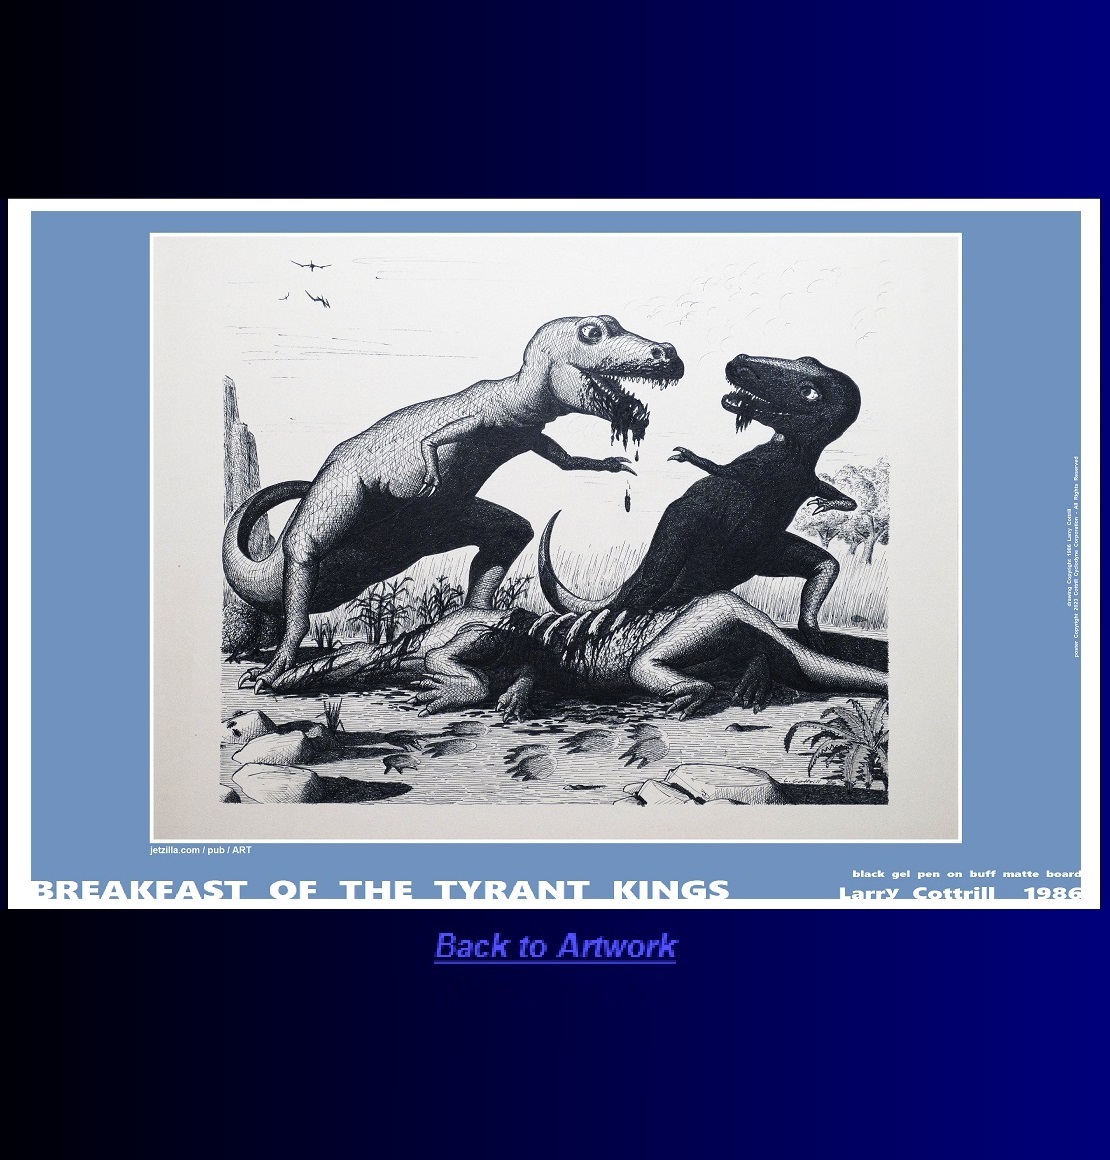 Landscape poster: Breakfast of the Tyrant Kings by Larry Cottrill